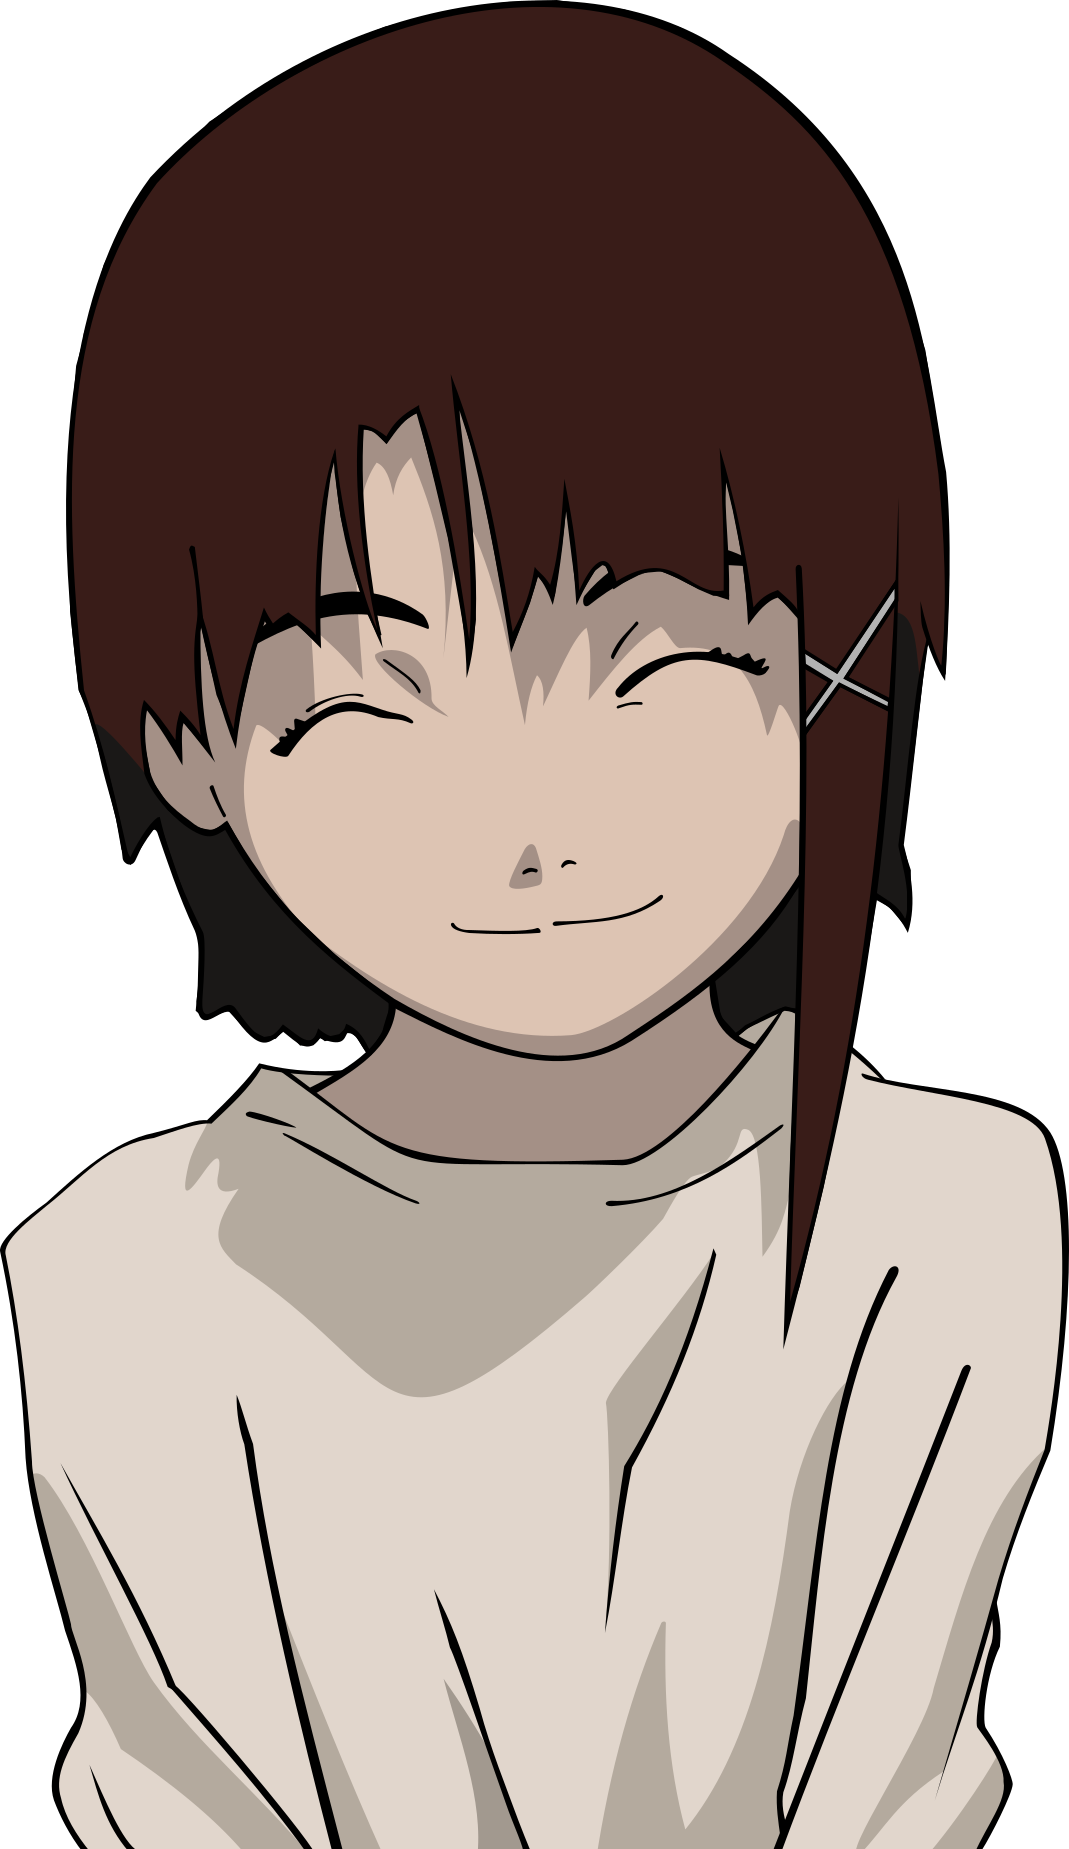 Lain from Serial Experiments Lain smiling